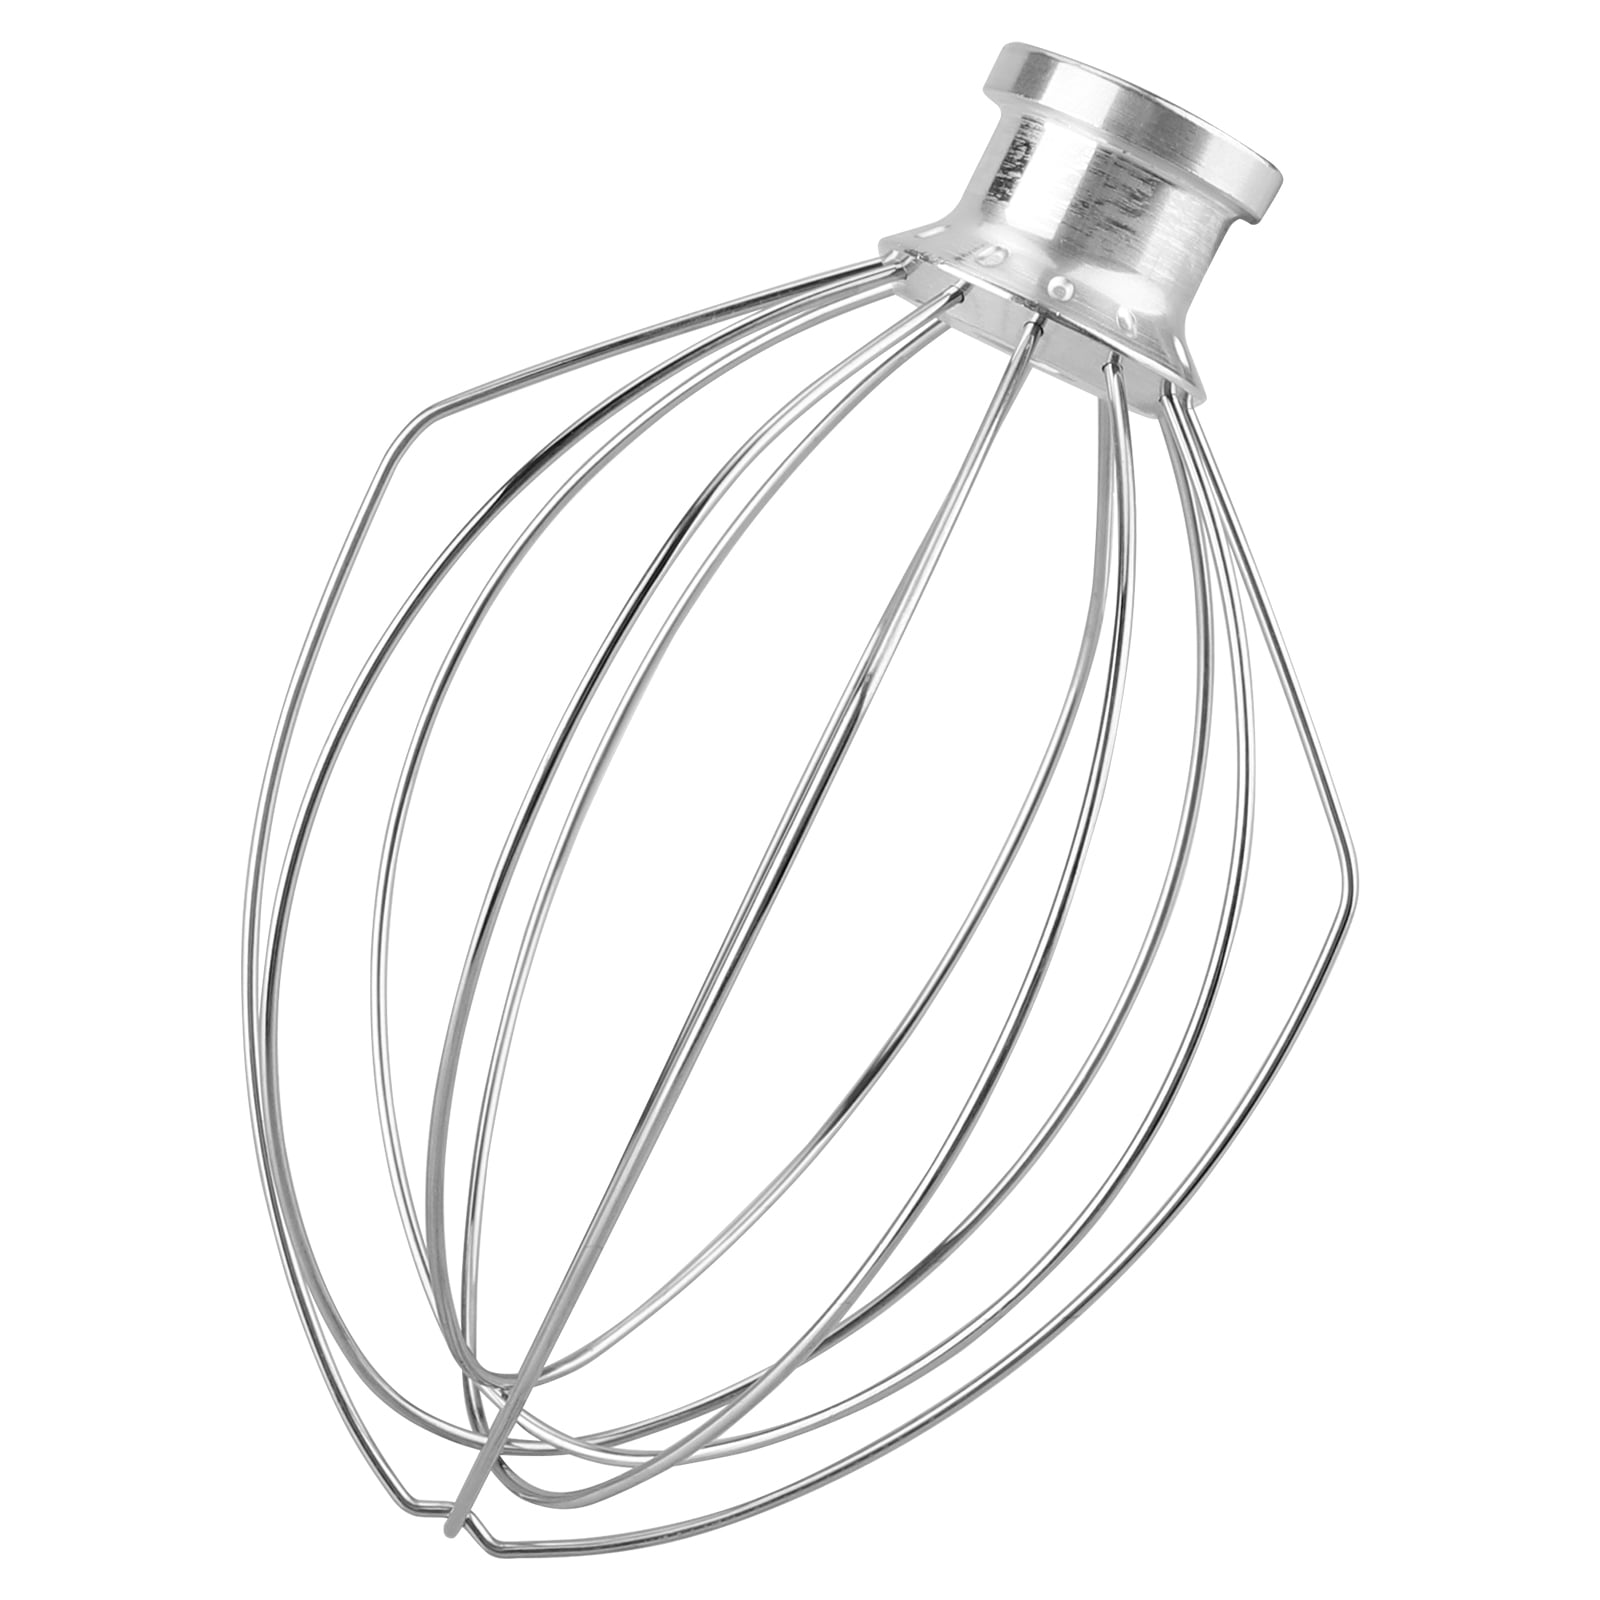 Gvode Stainless Steel 6-Wire Whip Whisk Attachment, Fits for 4.5-5QT  Title-Head Stand Mixer, For Kitchenaid Whisk Egg Cream Stirrer, Flour Cake  Whisk